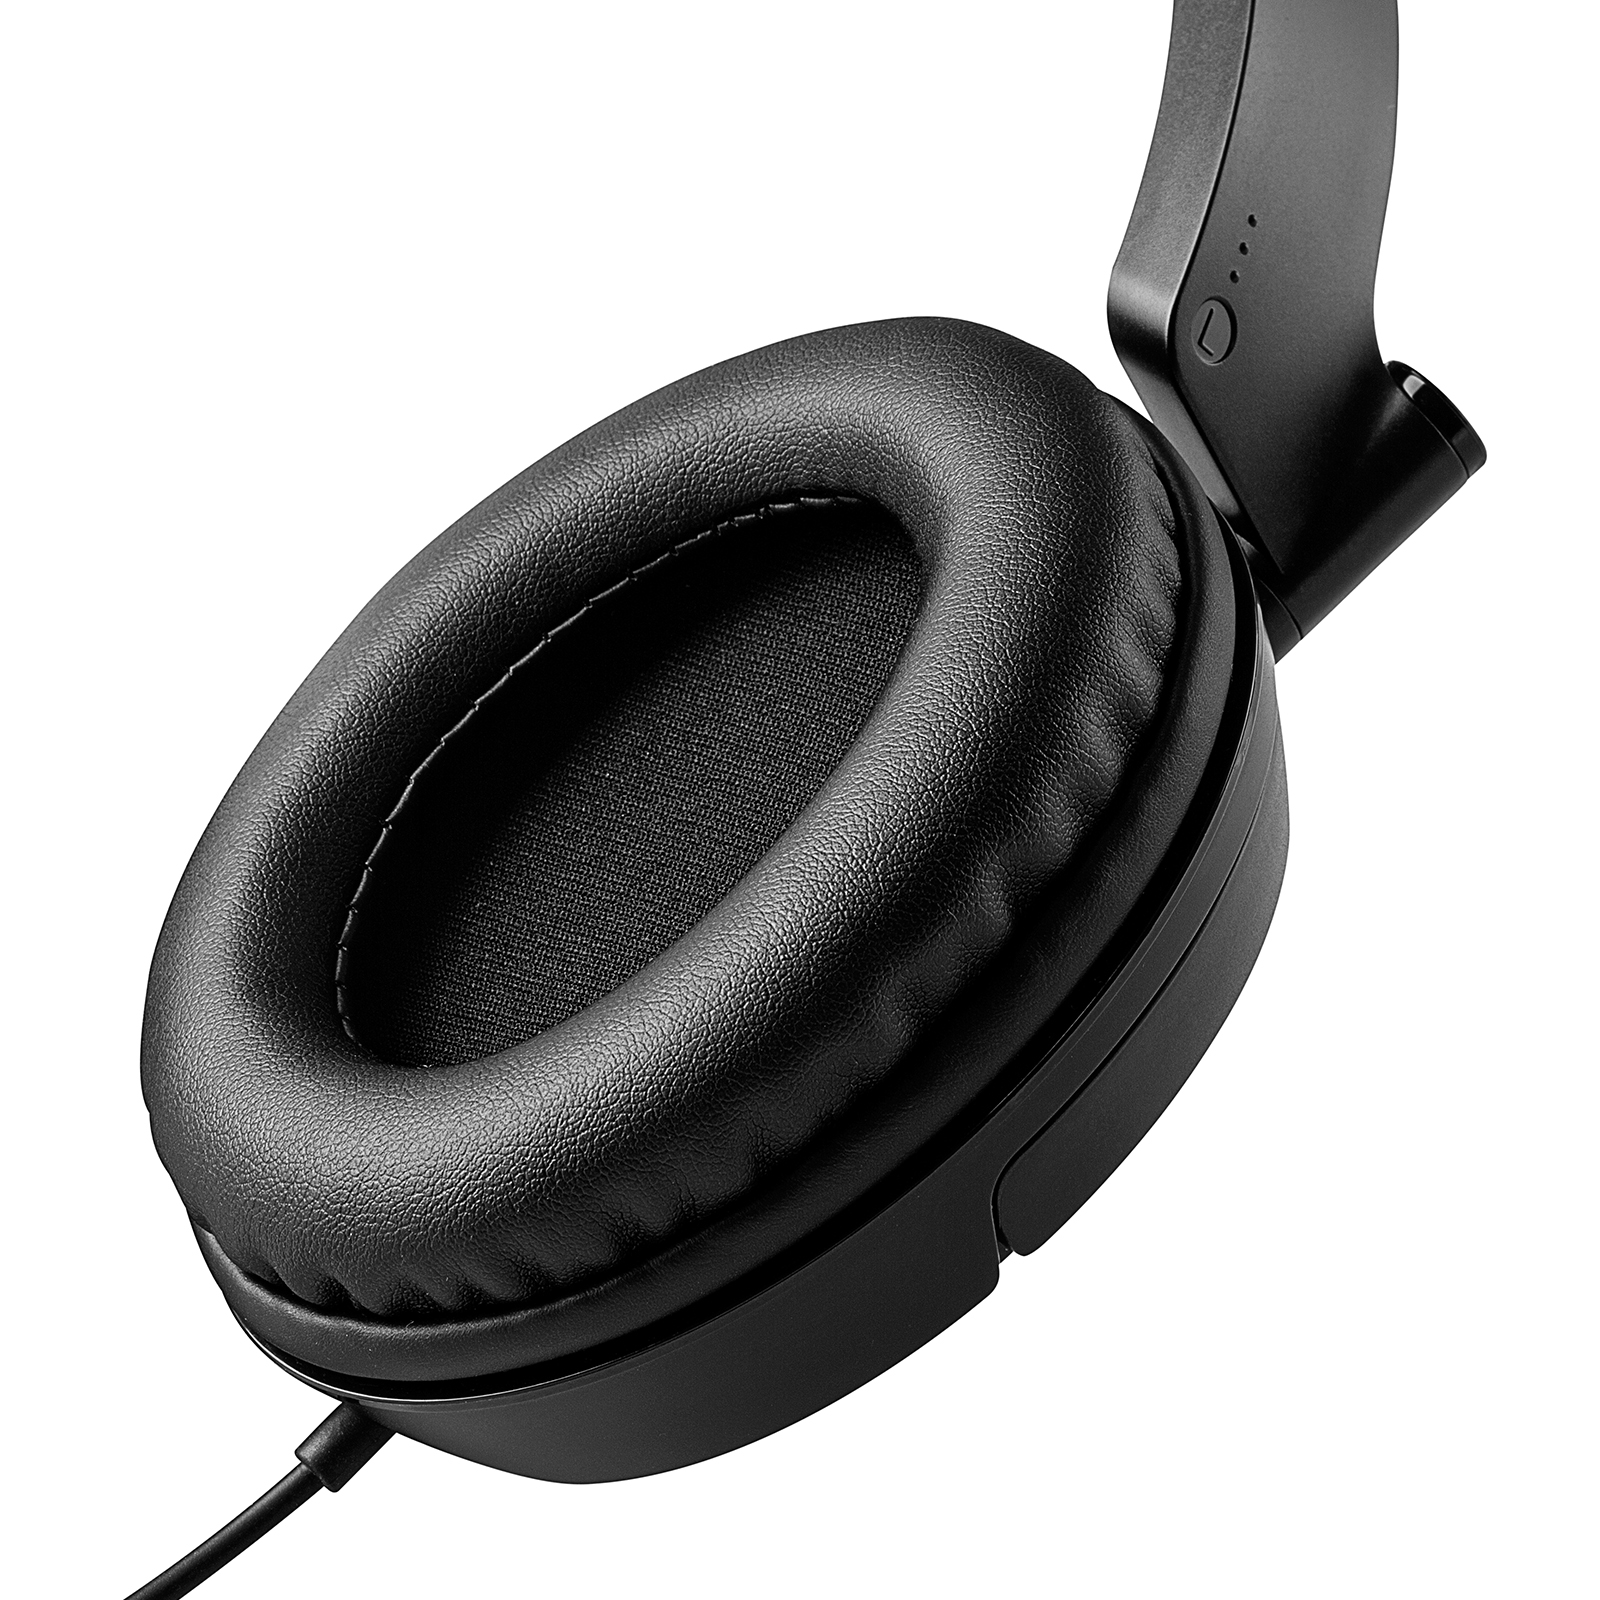 Edifier H840 Audiophile Over-the-ear Noise-Isolating Headphones - Black - image 3 of 7